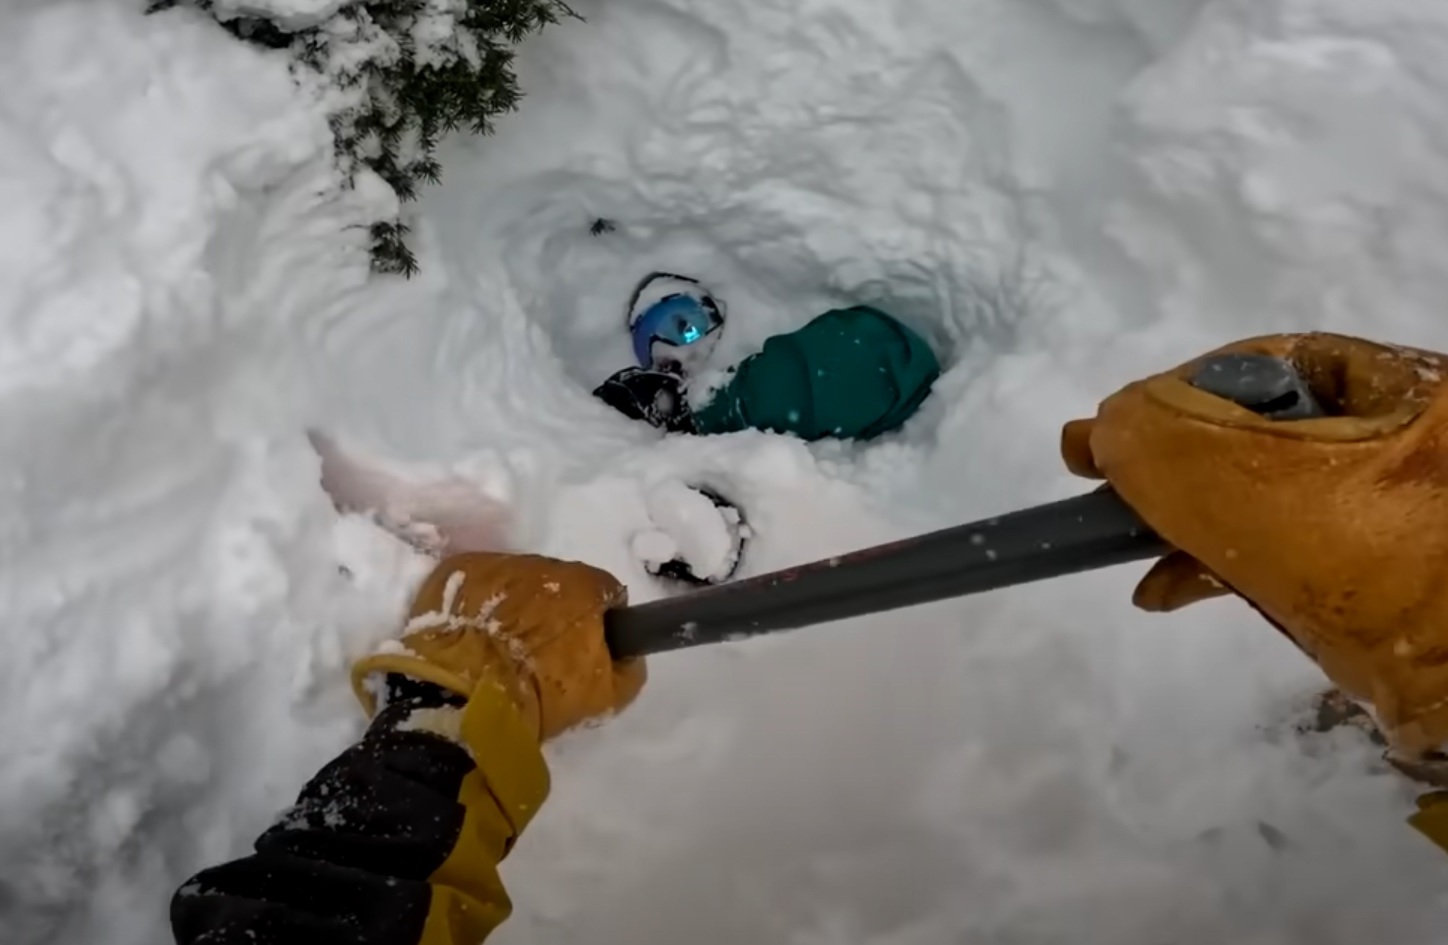 Snowboarder's Brush With Death Ends In A Dramatic Rescue By A Brave Stranger